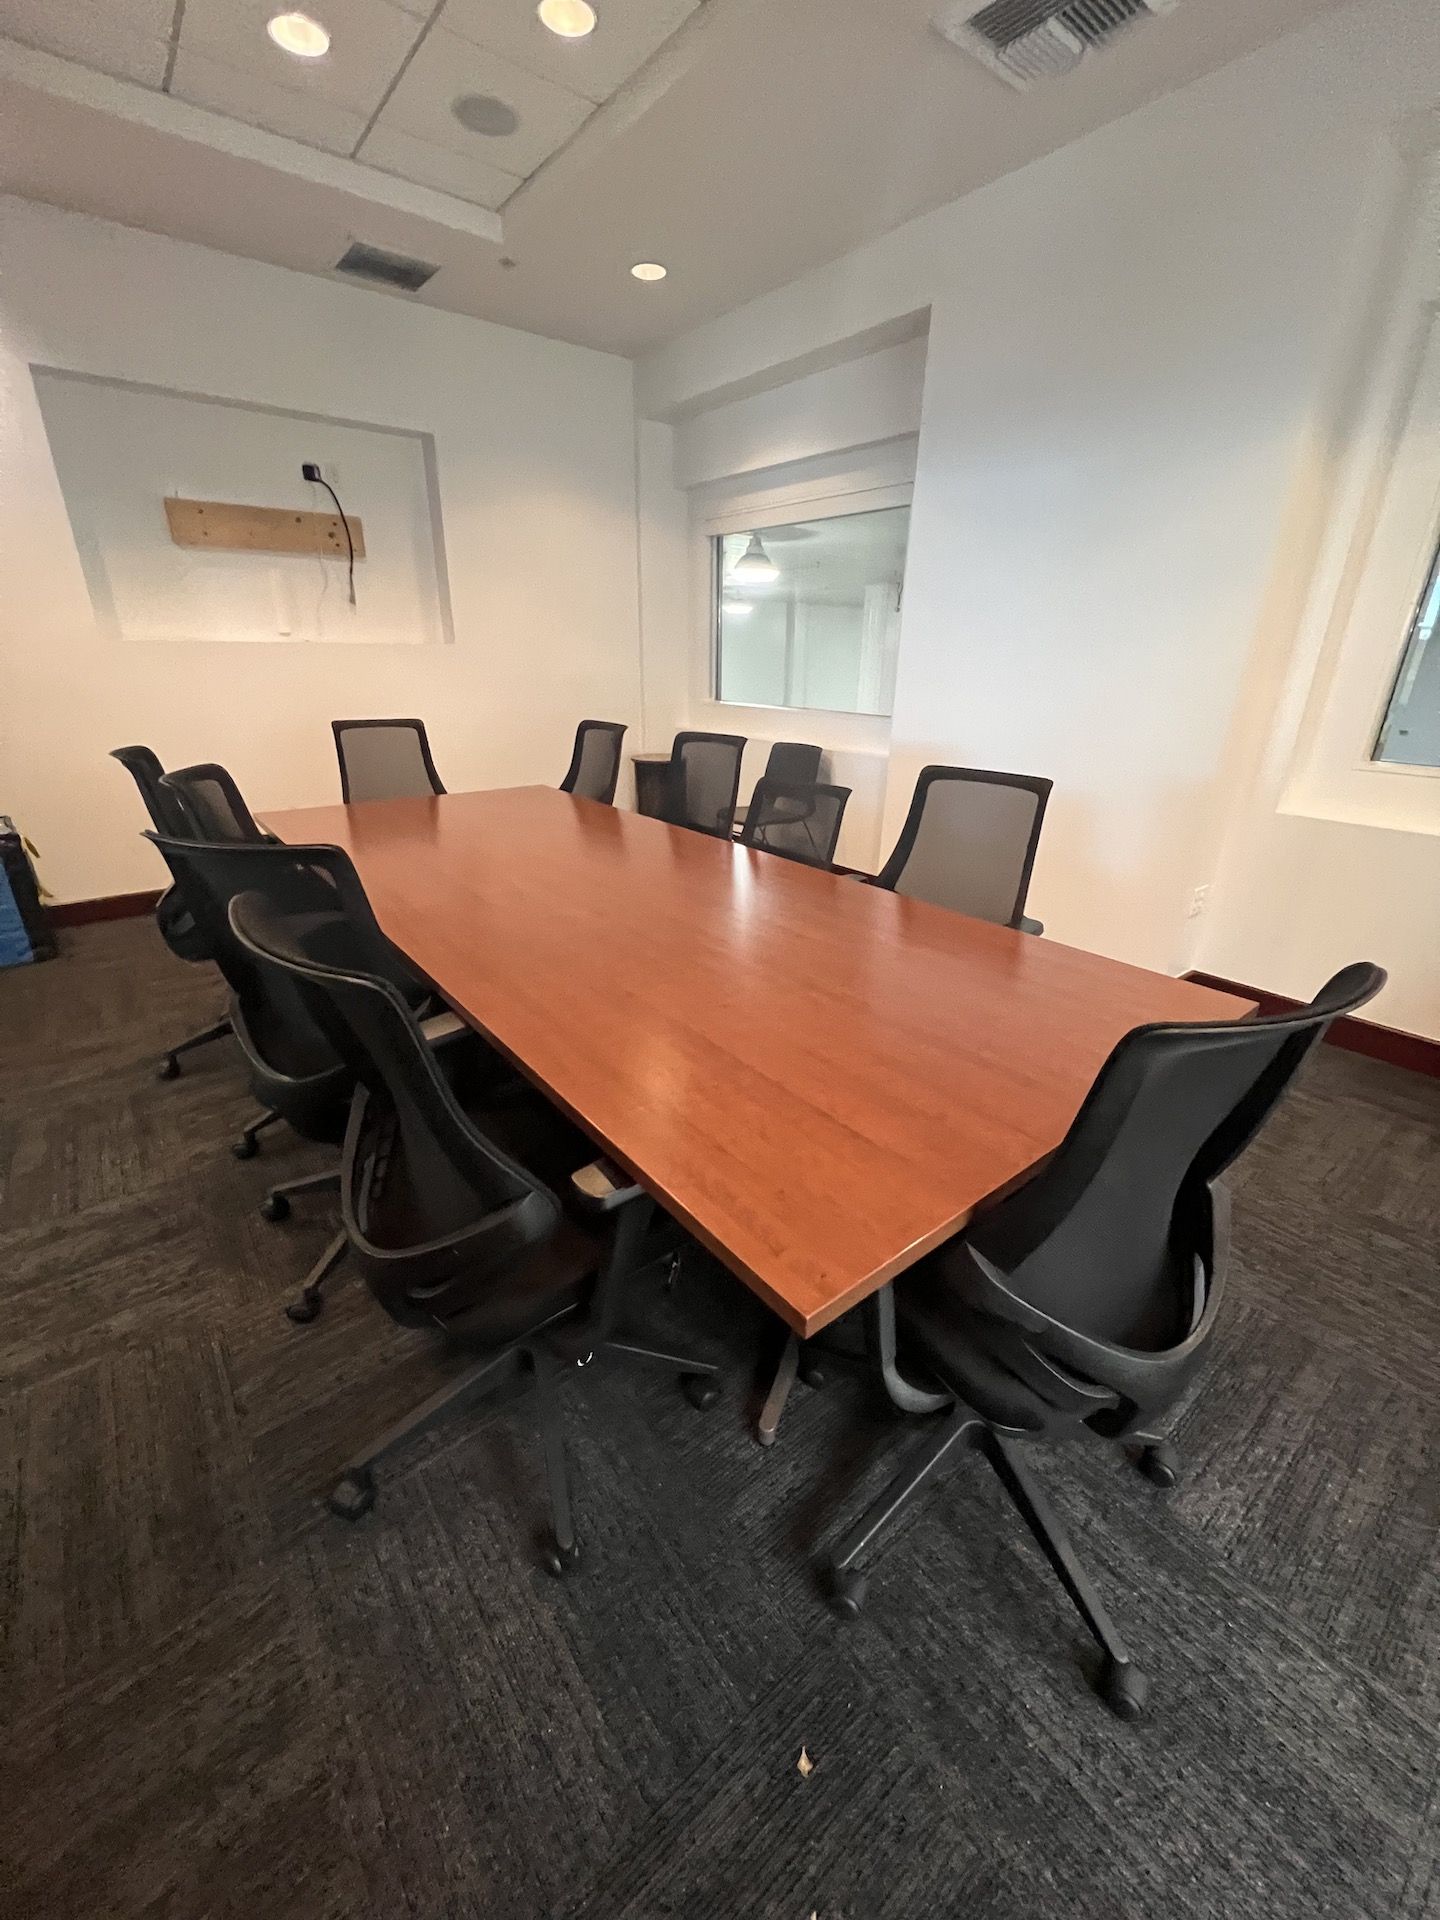 CONFERENCE TABLE AND CHAIRS, INCLUDES CONTENTS OF ROOM (RIGGING & SIMPLE LOADING FEE $100.00)